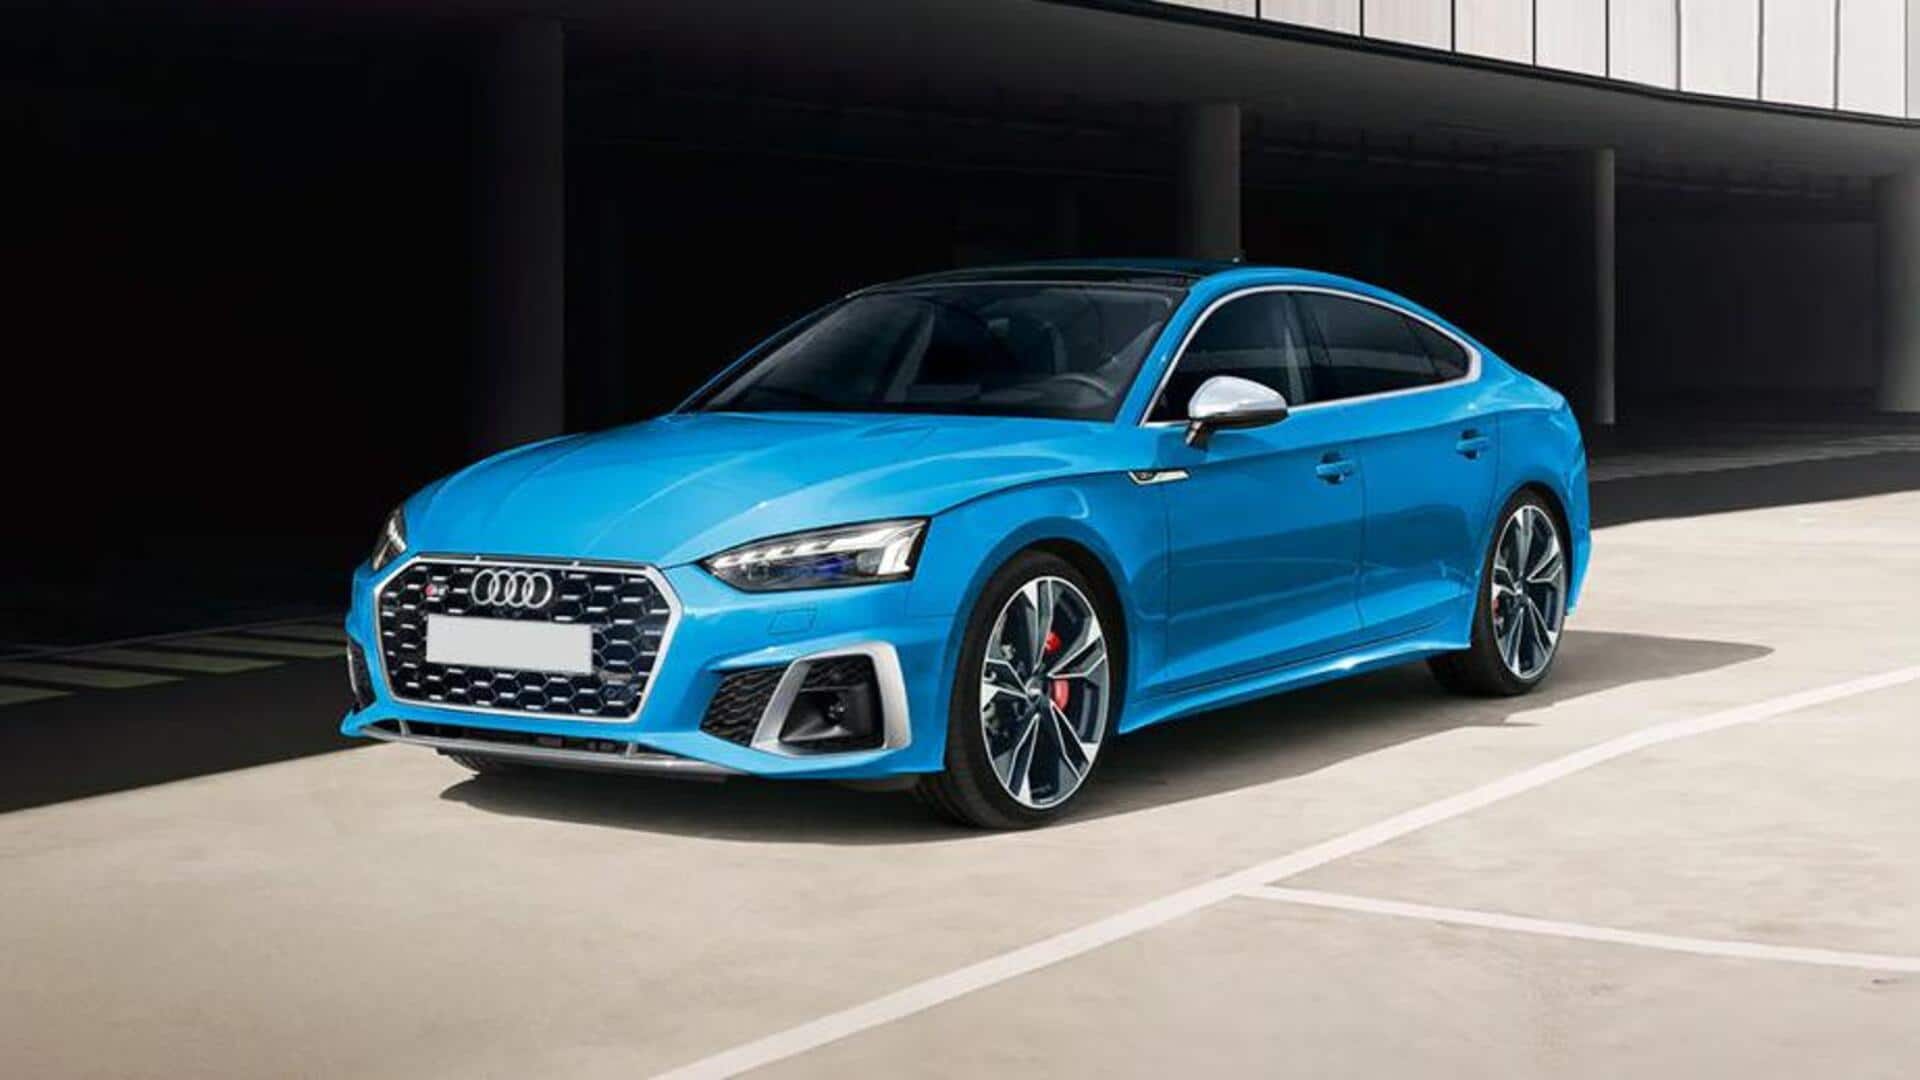 2025 Audi S5 Sportback spied on test: Expected features